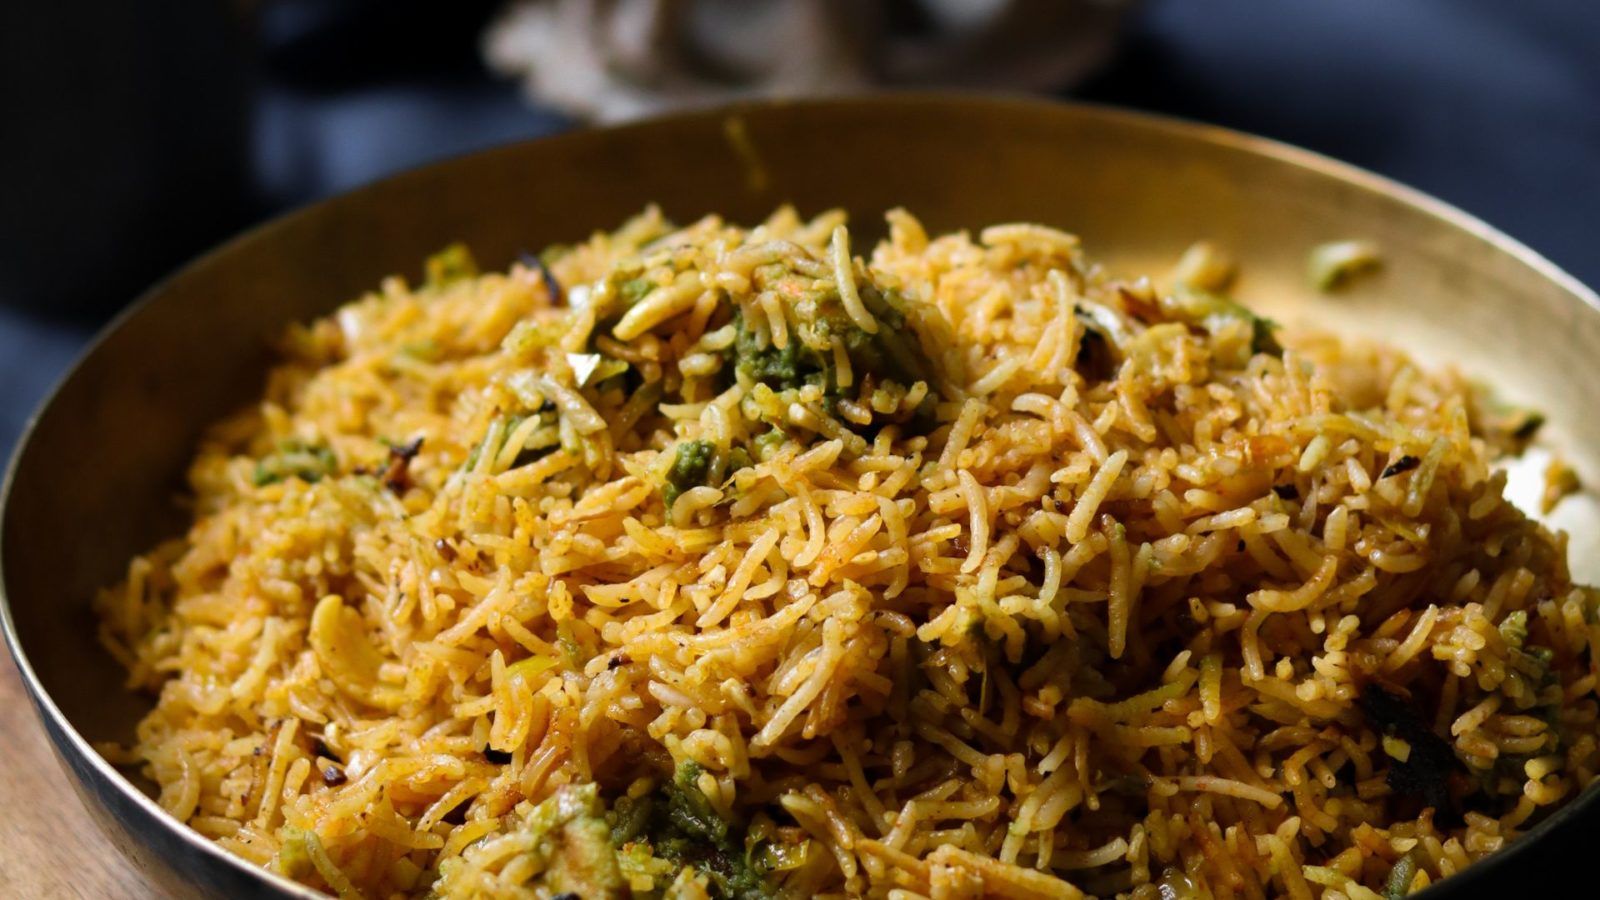 These places in Delhi offer drool-worthy mutton biryani that will make you want more!